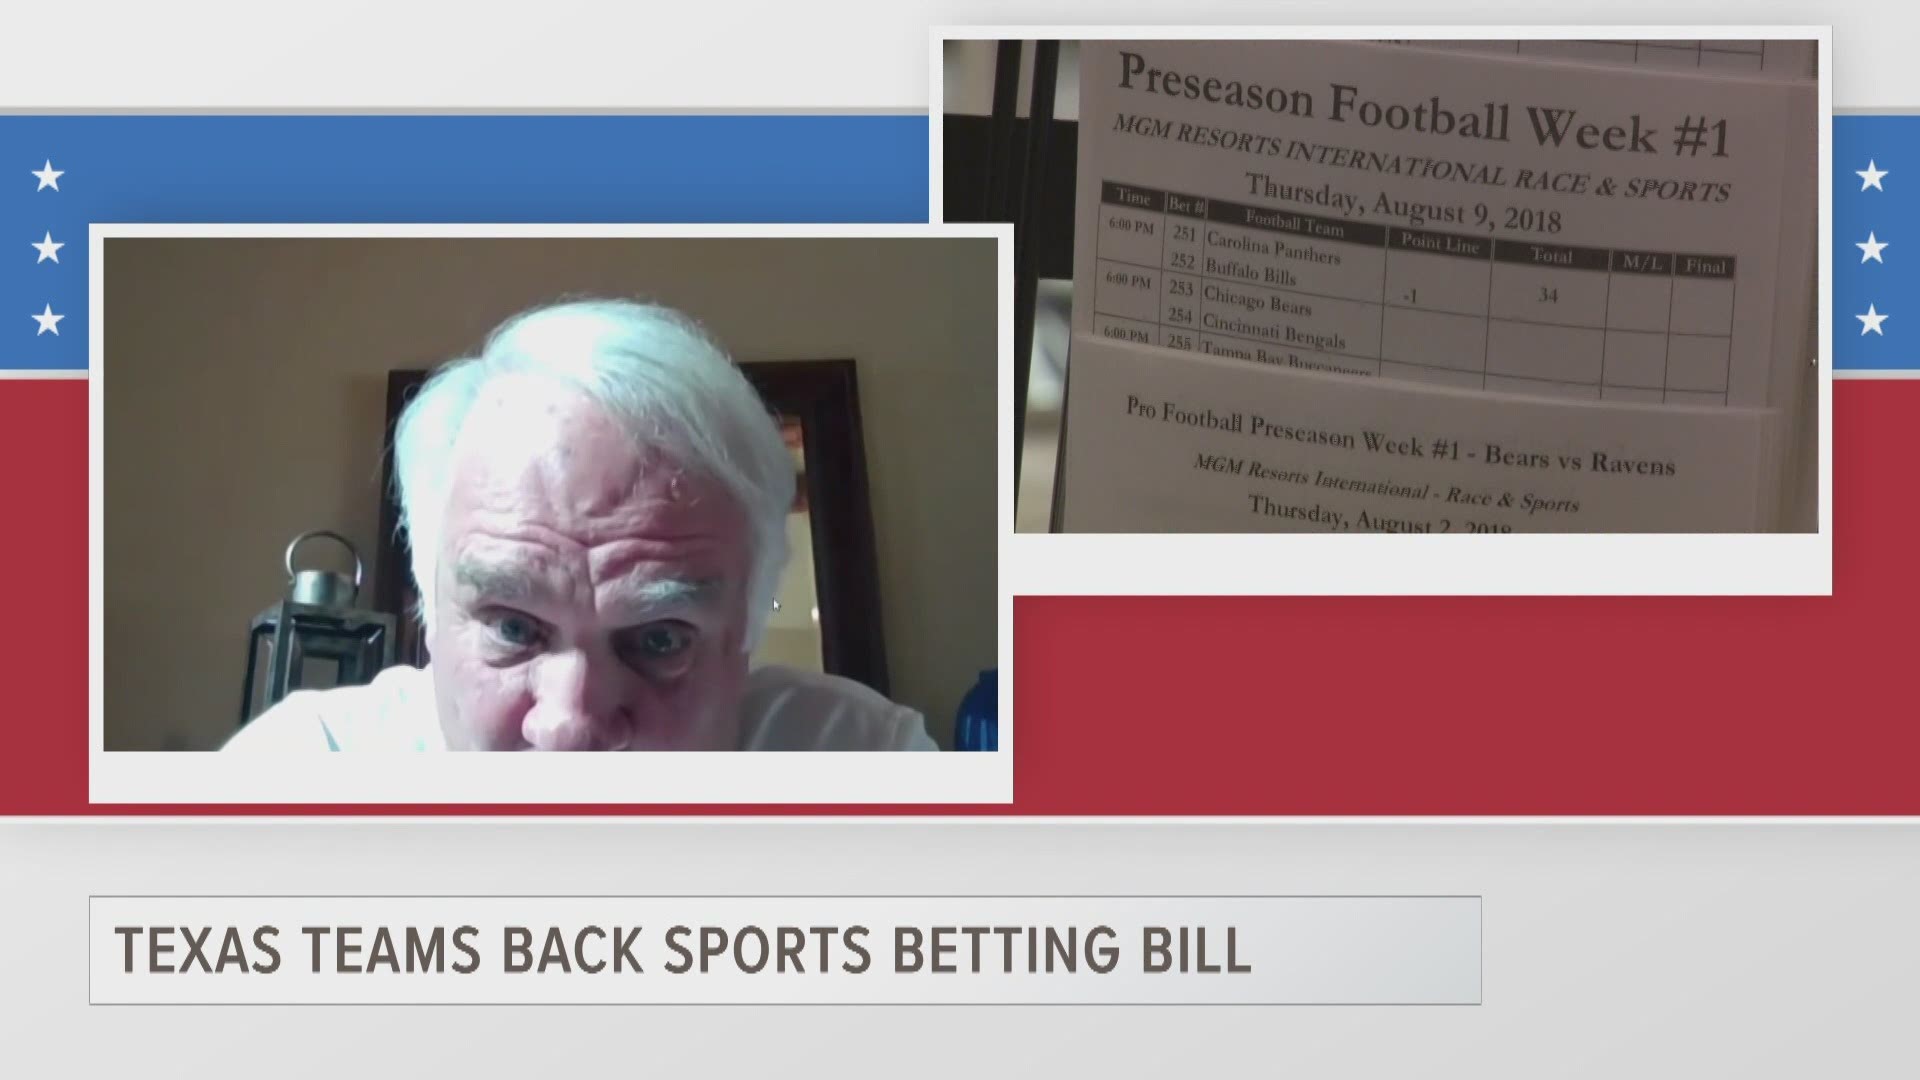 Part two of an interview with Jim Lites, Chairman of the Dallas Stars, about why the pro sports teams in Texas back a bill that would legalize sports betting